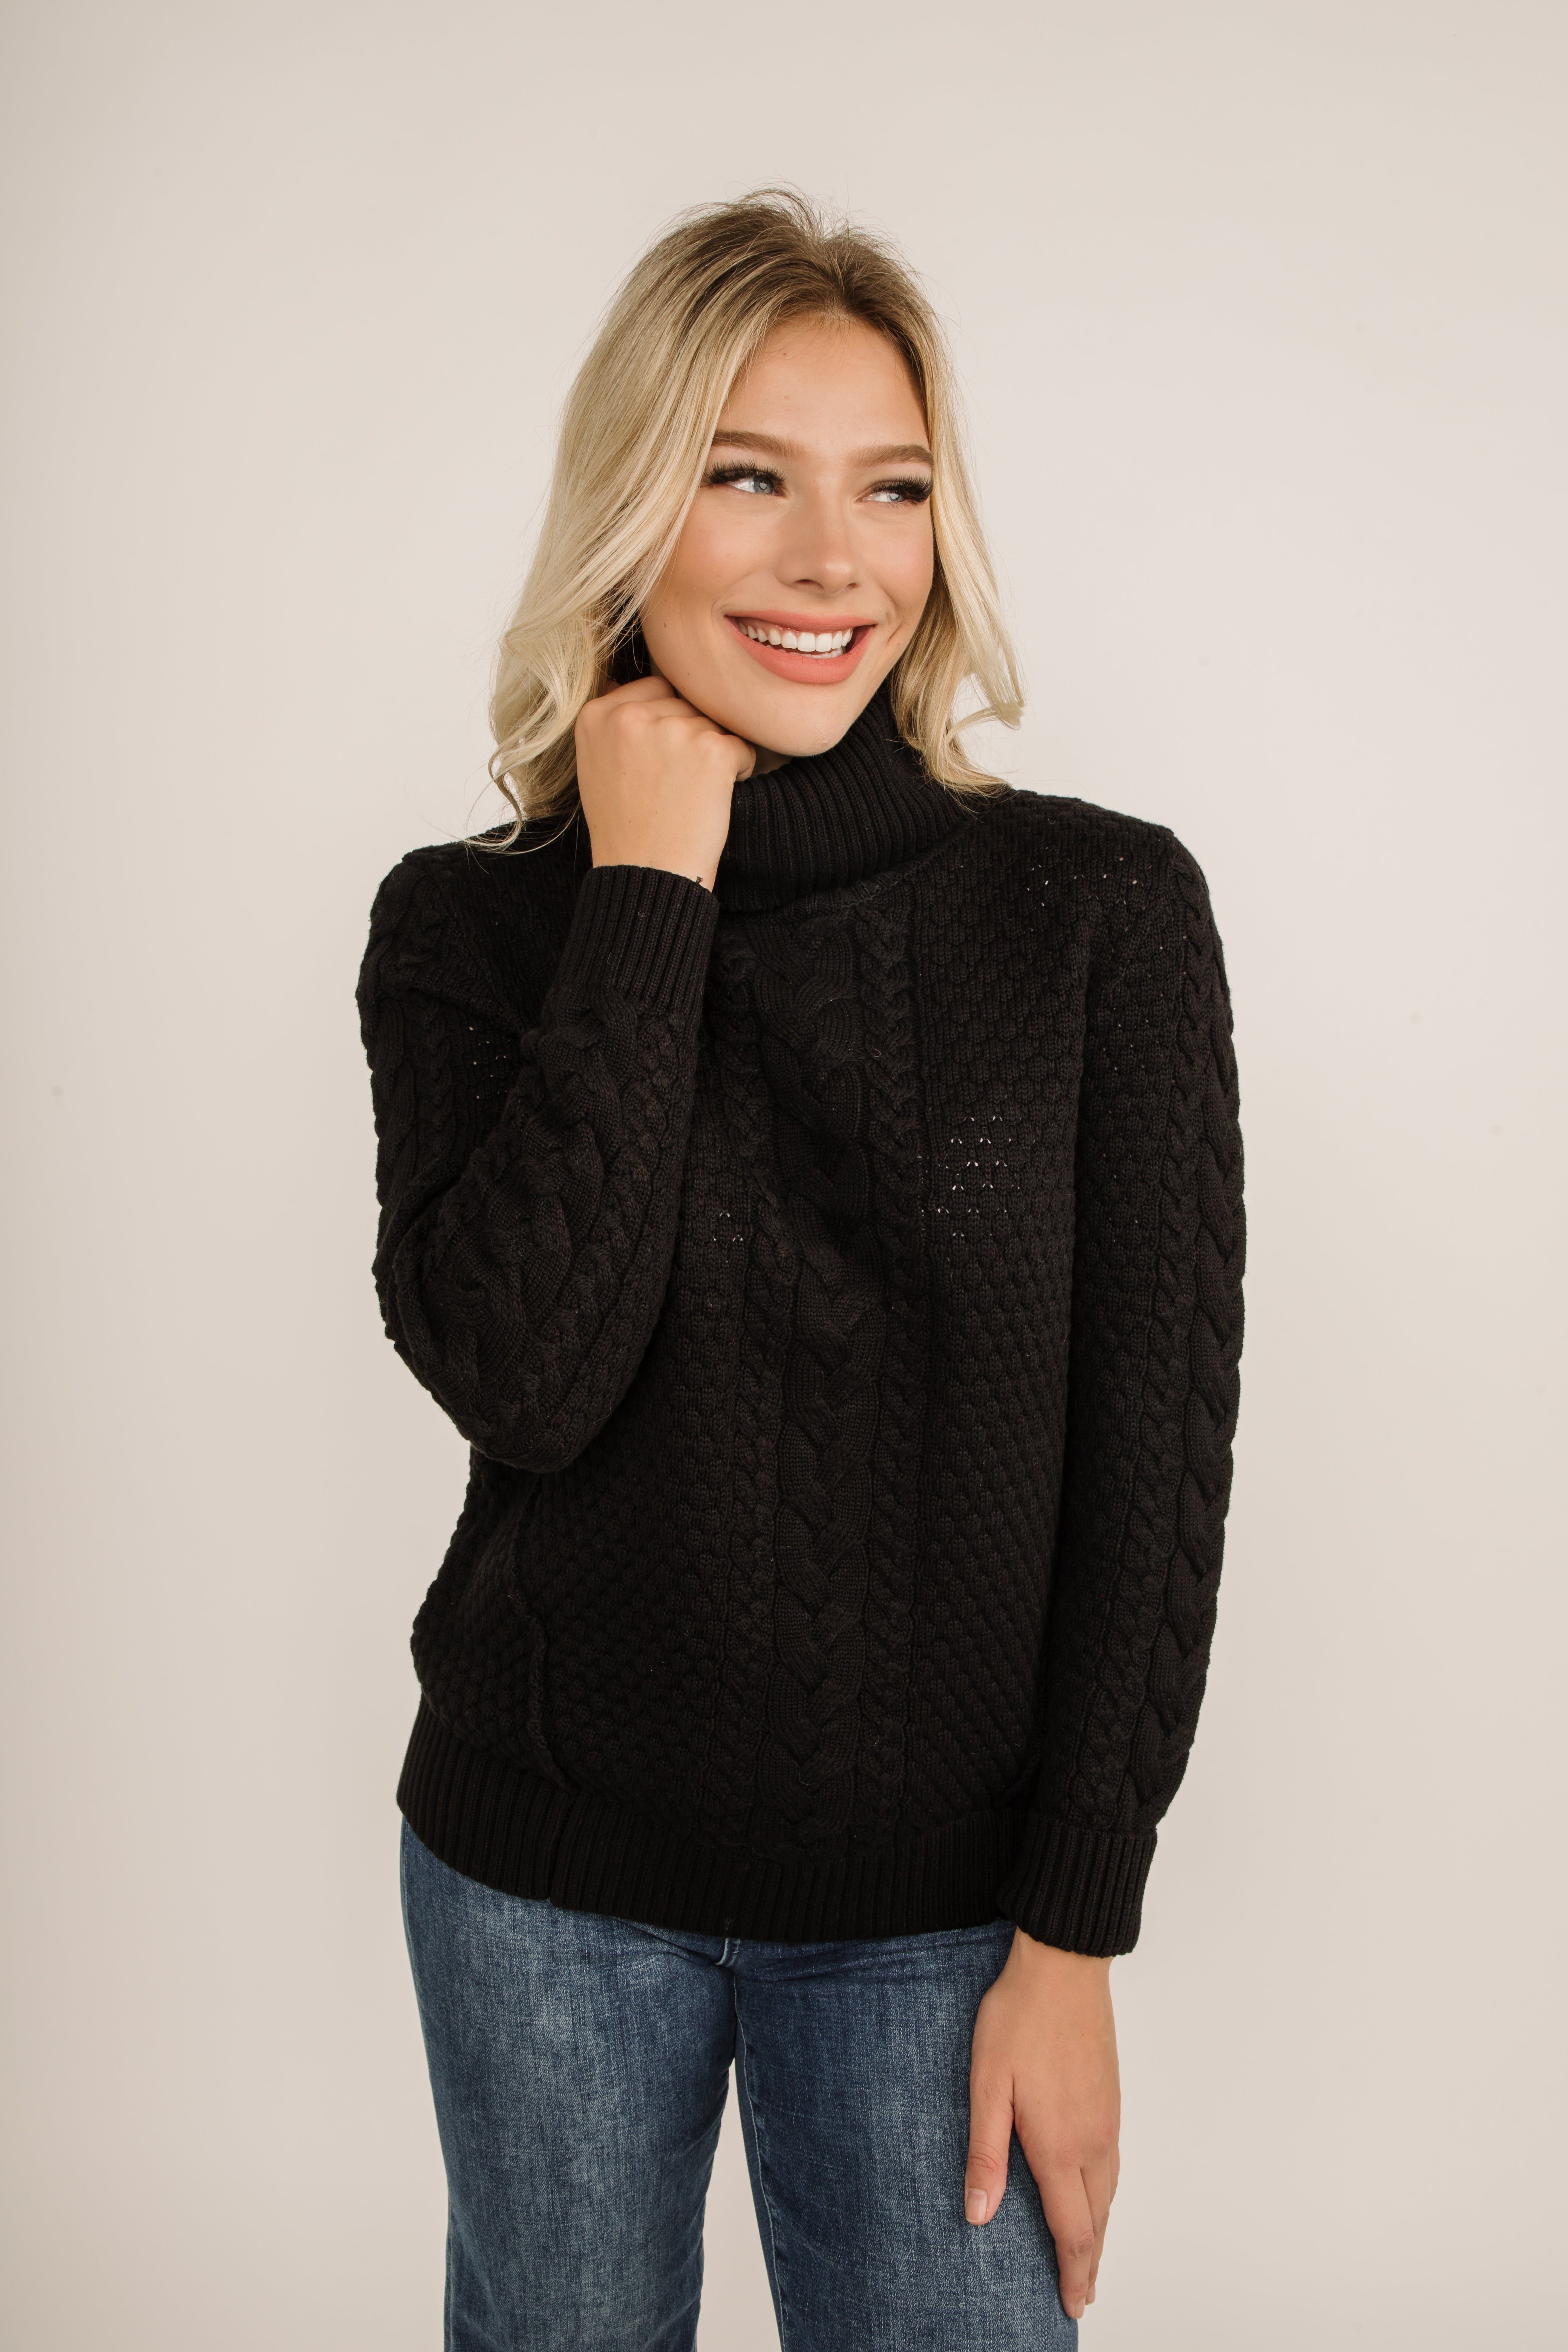 Women's Clothing ALISON SHERI (A40020) Cable Knit Cowl Neck Sweater in BLACK